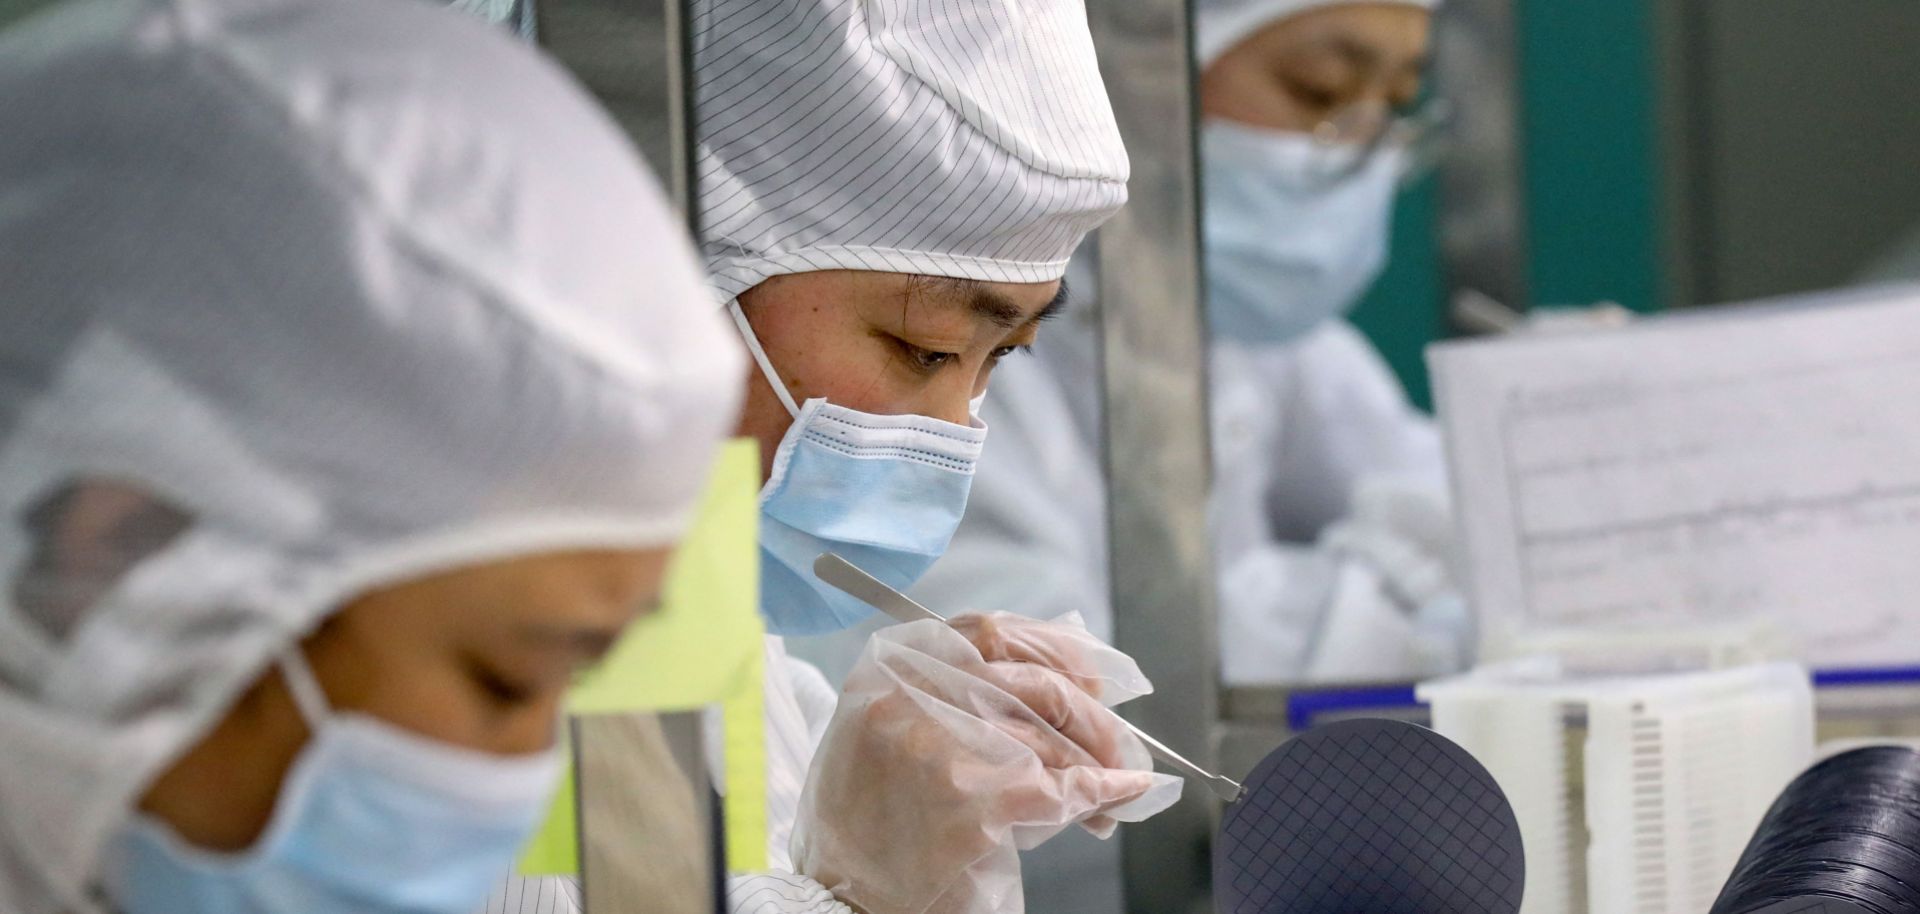 Employees make chips at a semiconductor factory in China's eastern Jiangsu province on March 17, 2021. 